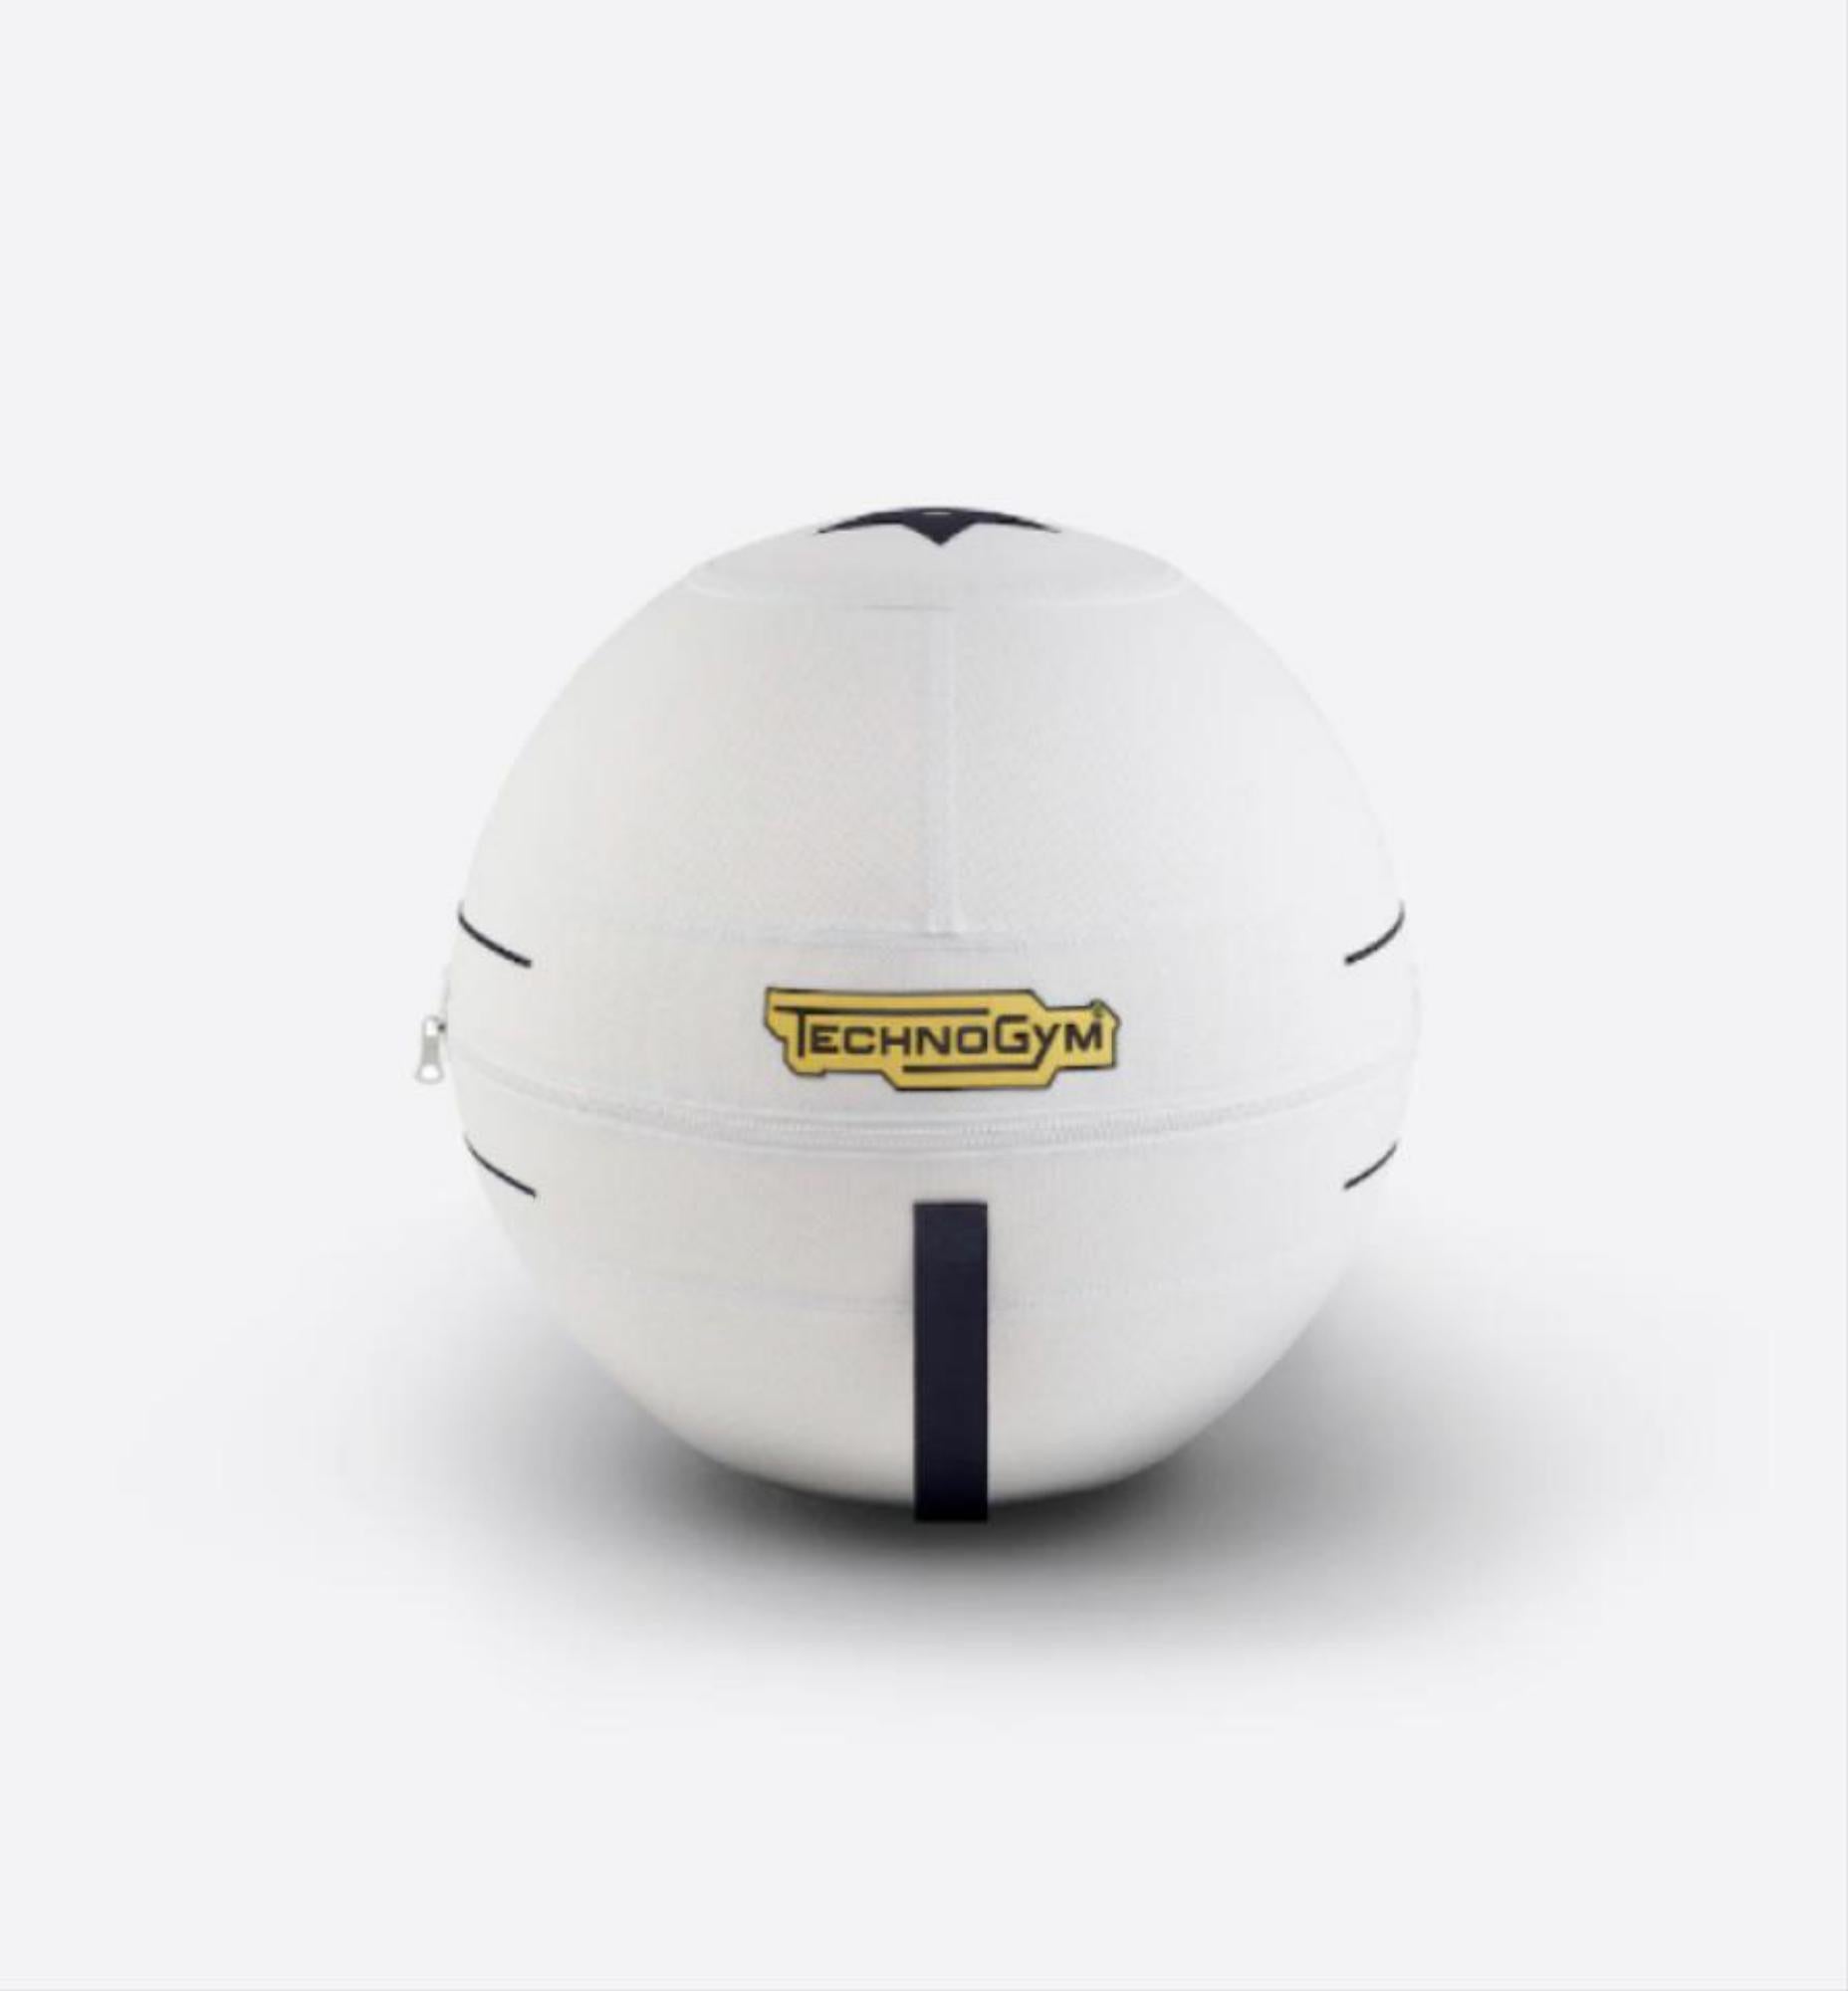 Dior Limited Edition White Logo Technogym Gym Ball for Dior Yoga 1DIOR127 In New Condition For Sale In Dix hills, NY